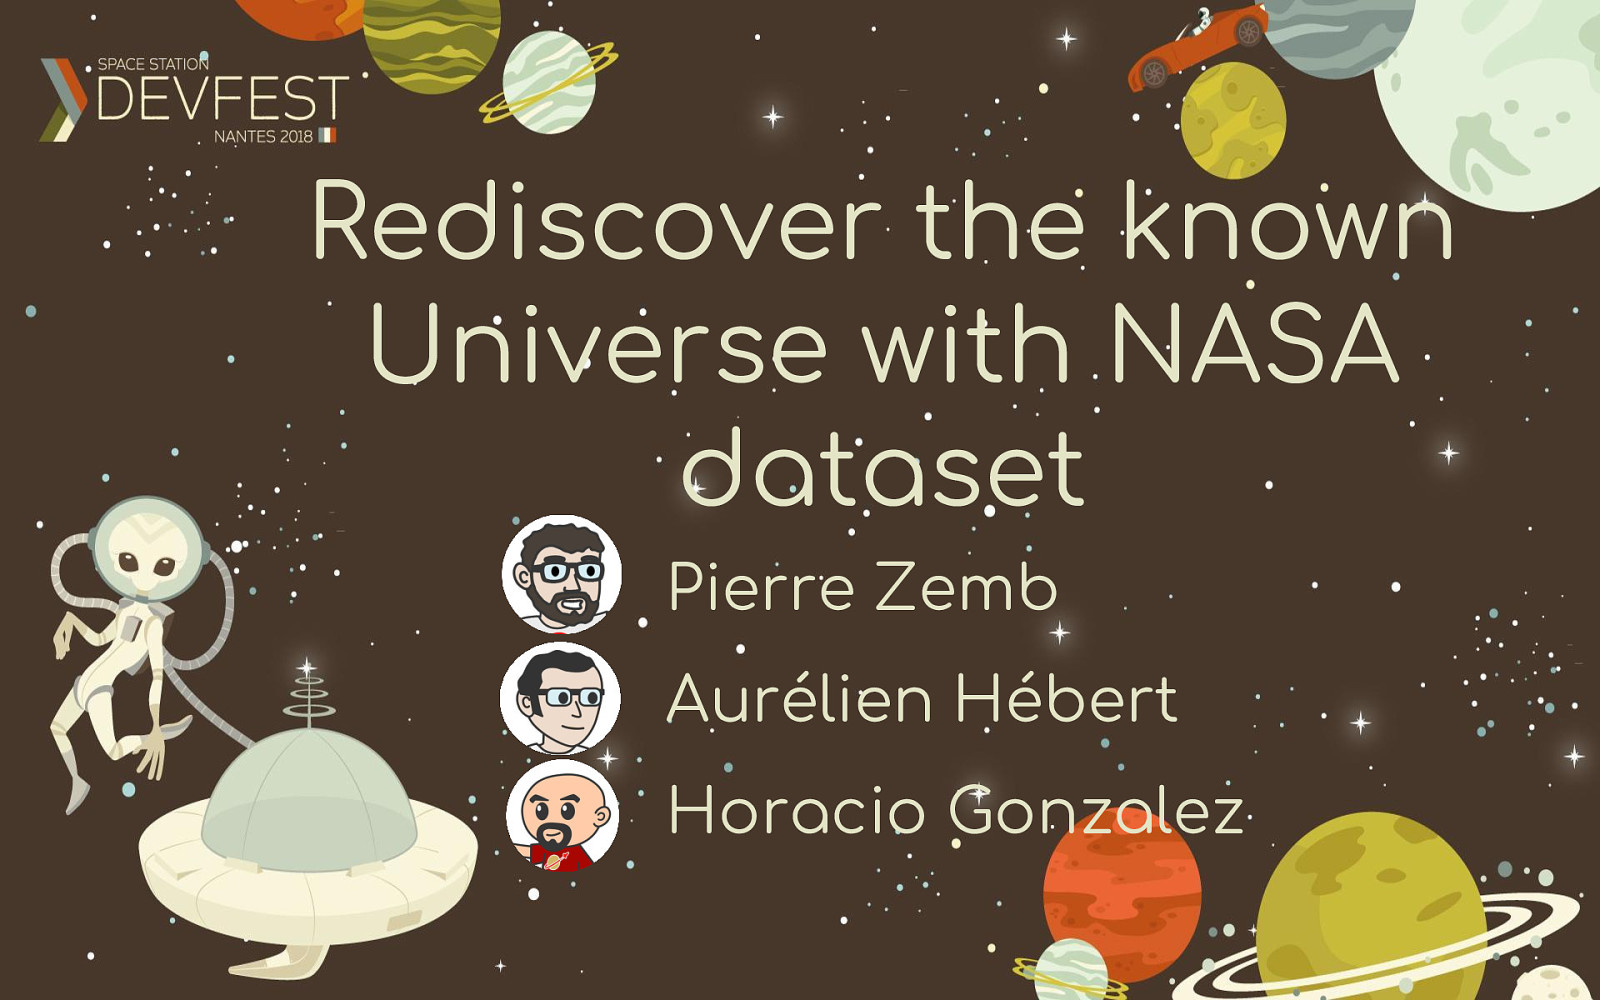 Rediscover the known Universe with NASA dataset